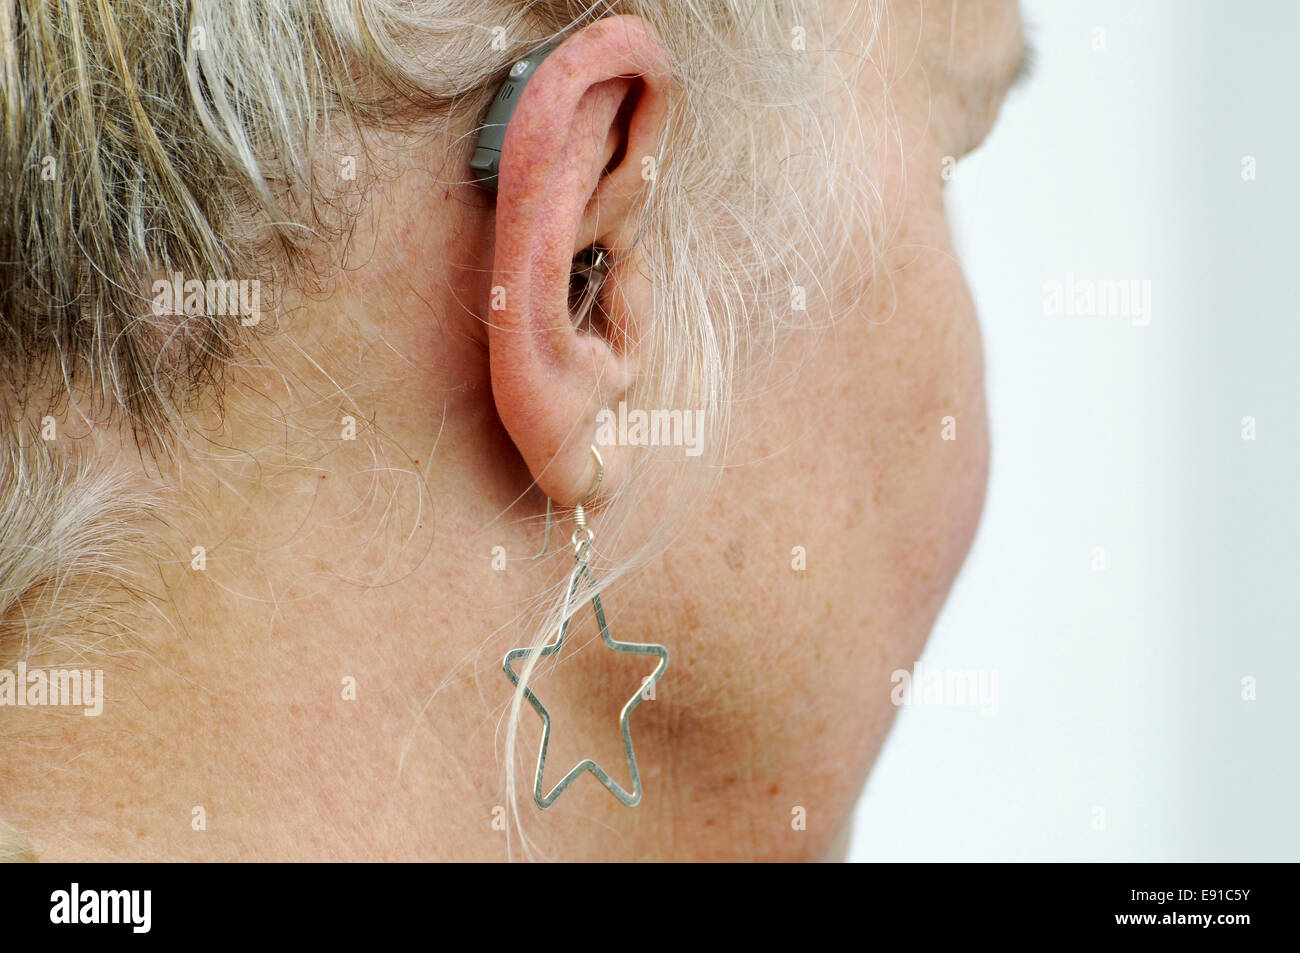 Modern small hearing aid behind the ear of a woman Stock Photo